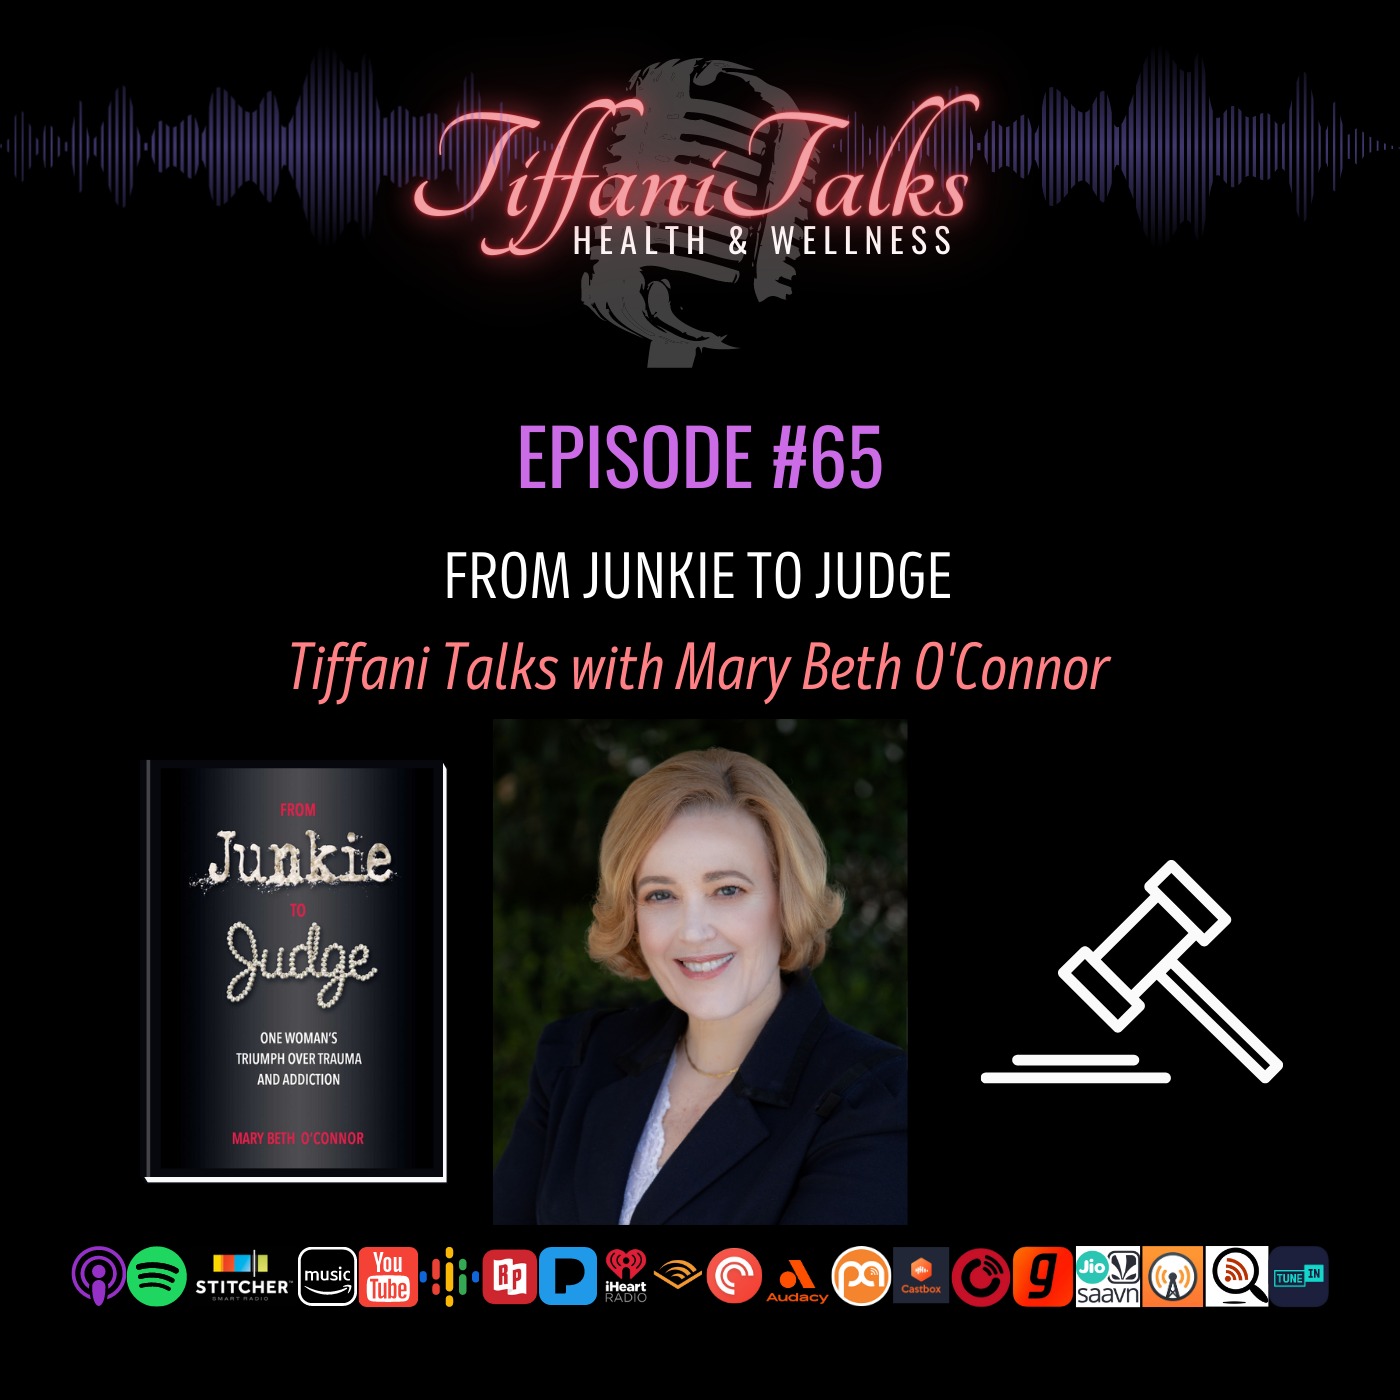 EP-65 FROM JUNKIE TO JUDGE: One Woman's Triumph Over Trauma & Addiction